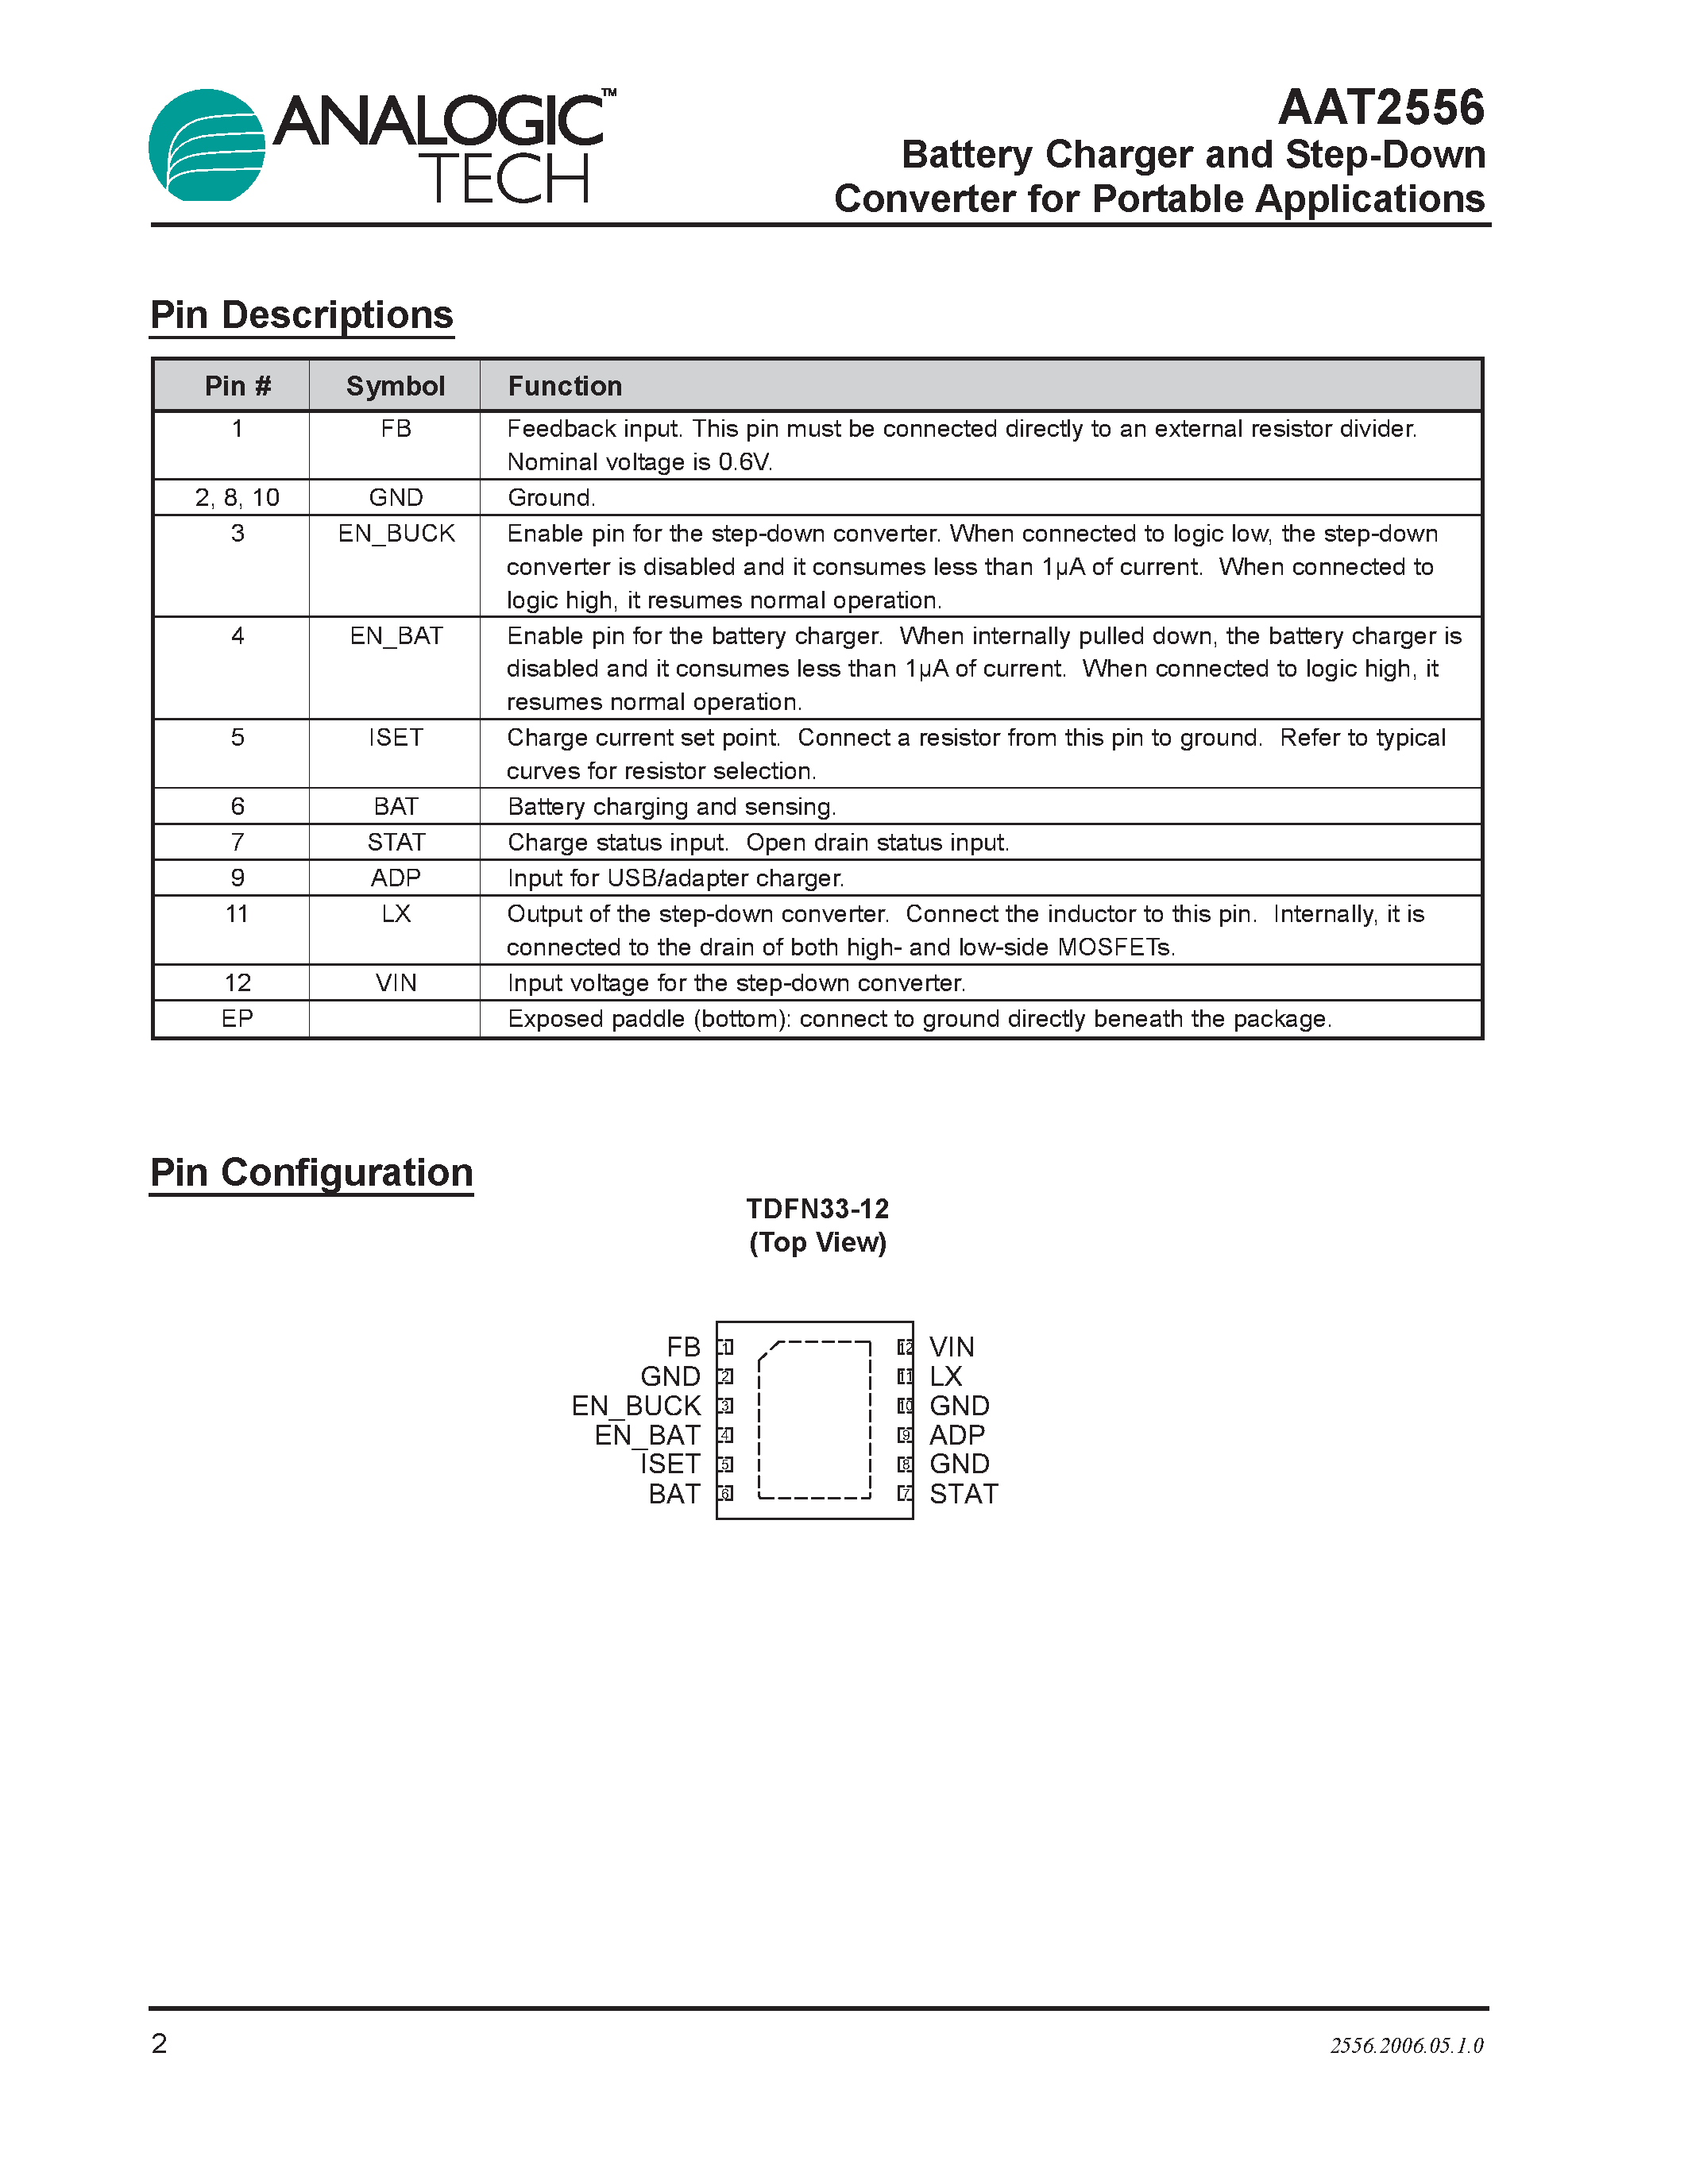 Datasheet AAT2556 - Battery Charger and Step-Down Converter page 2